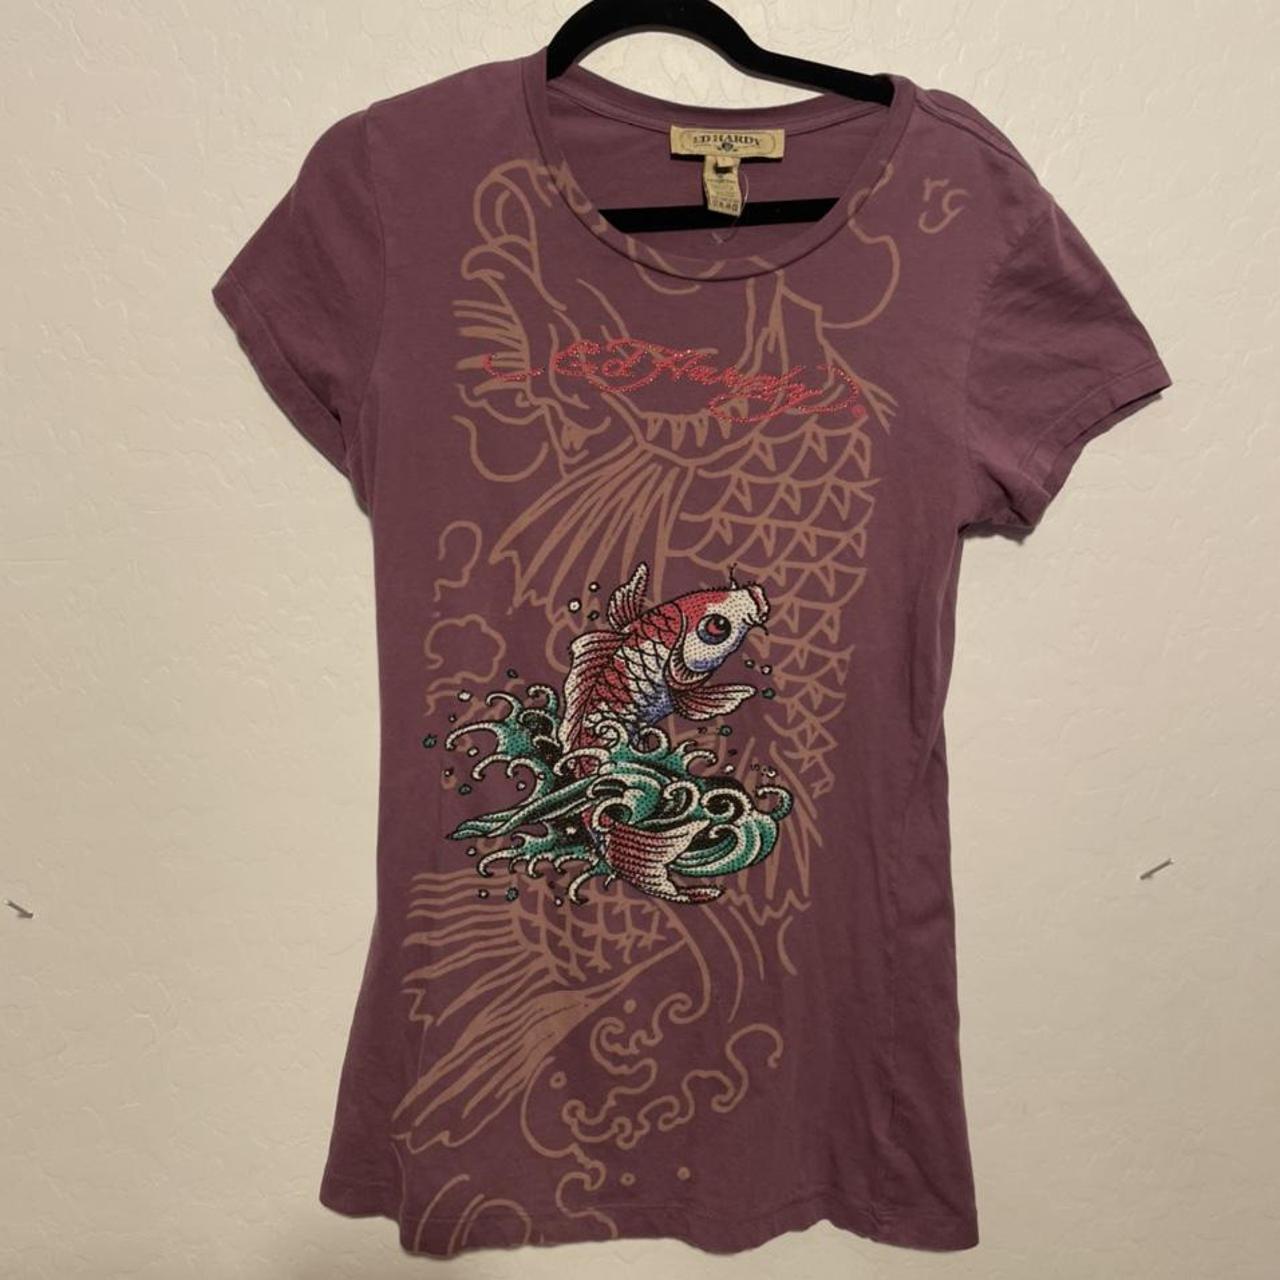 Ed hardy koi fish shirt with red bedazzled... - Depop